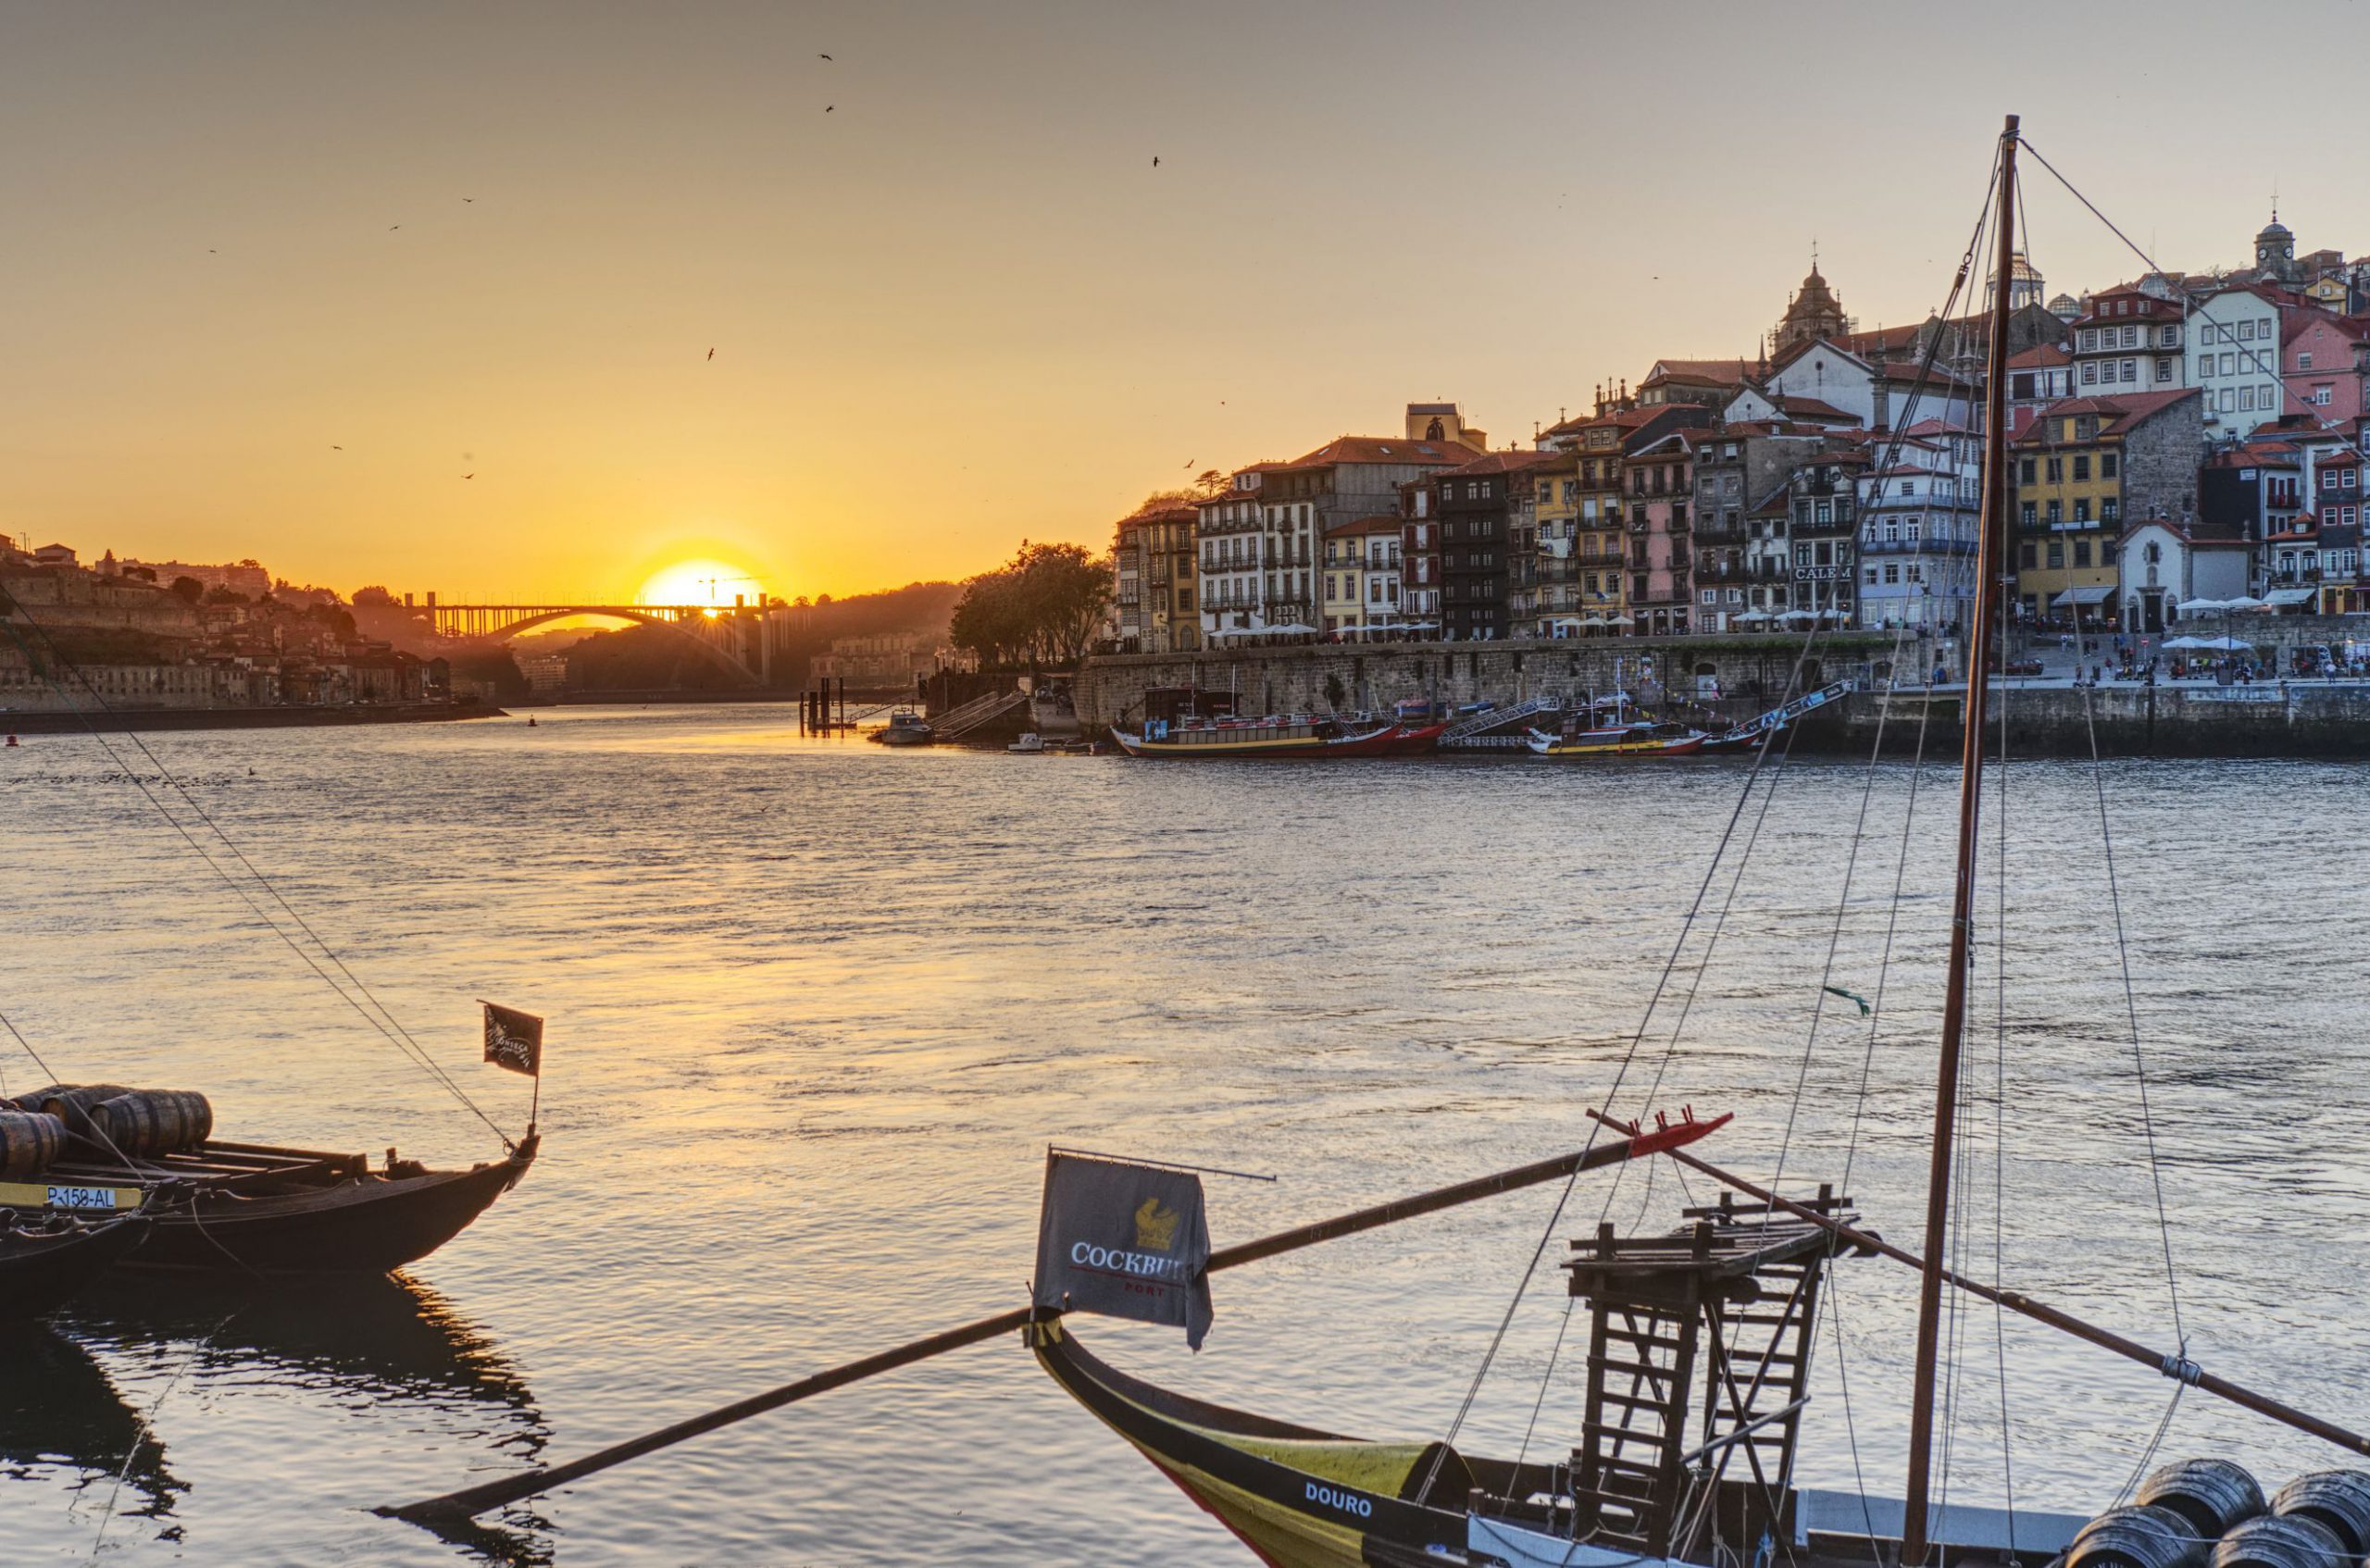 The sun goes down over the sea, in the foreground one of the Douro bridges of Porto